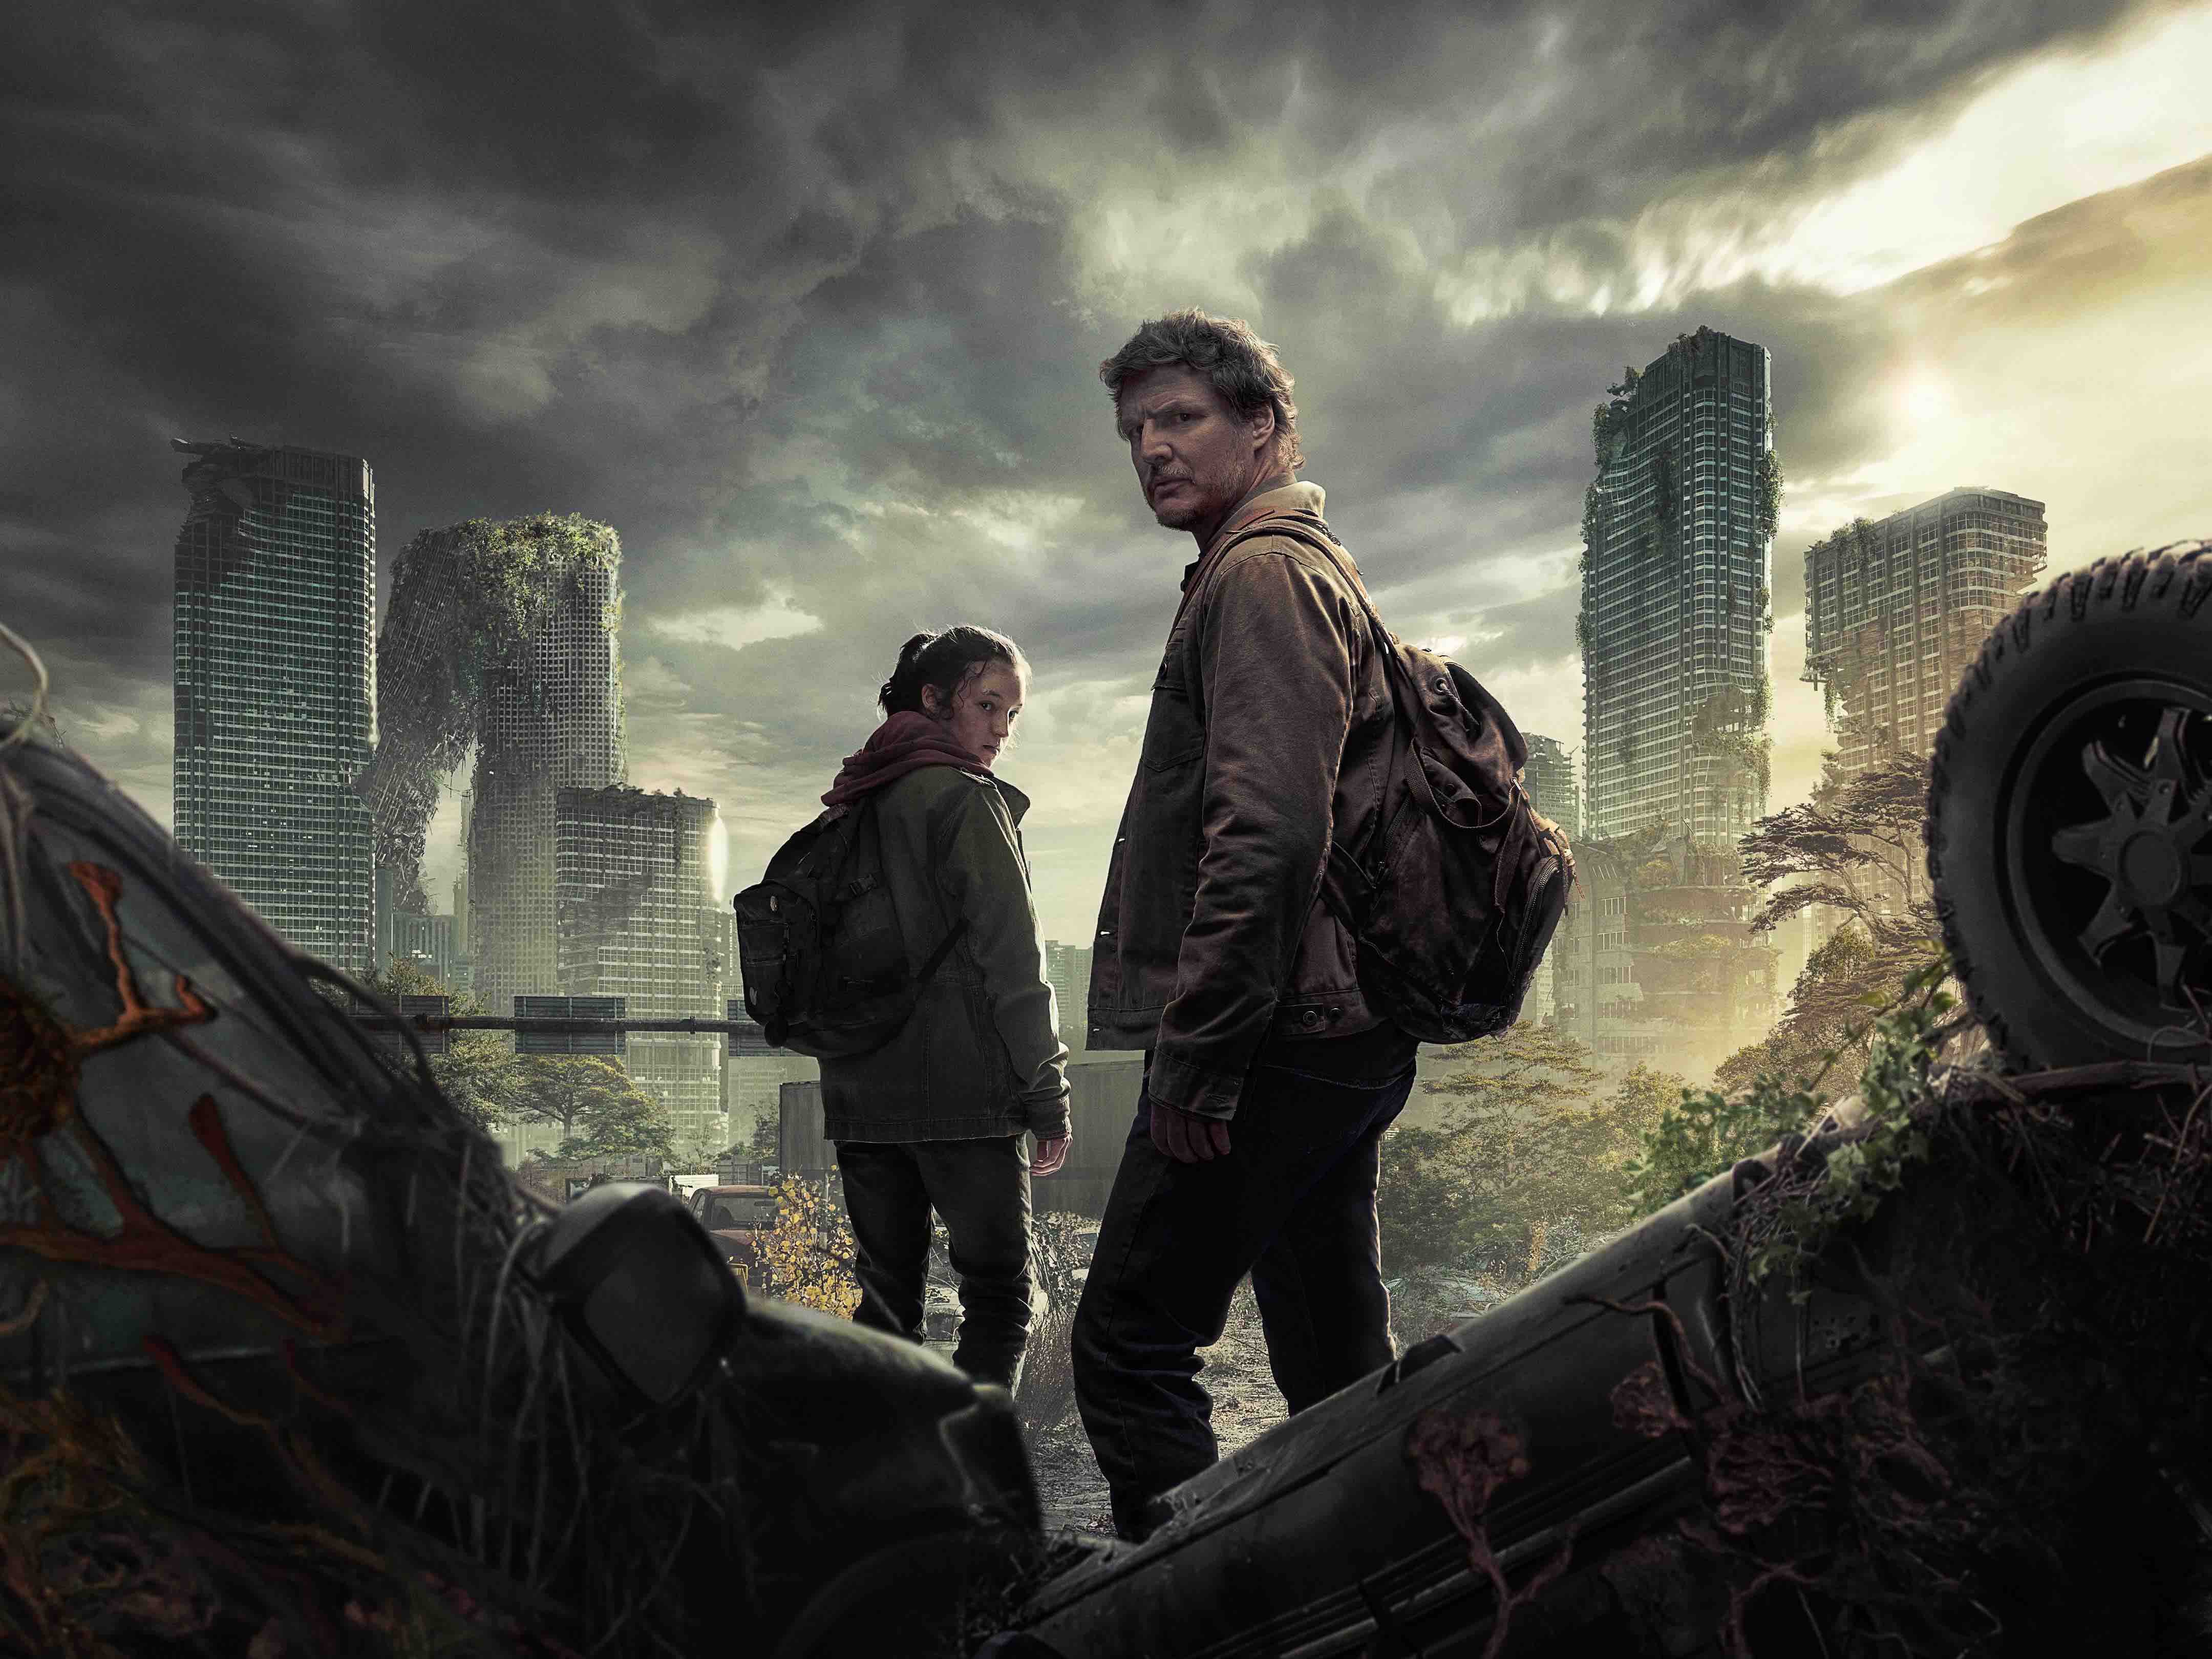 The Last of Us': How HBO's Show Adapted the Video Game